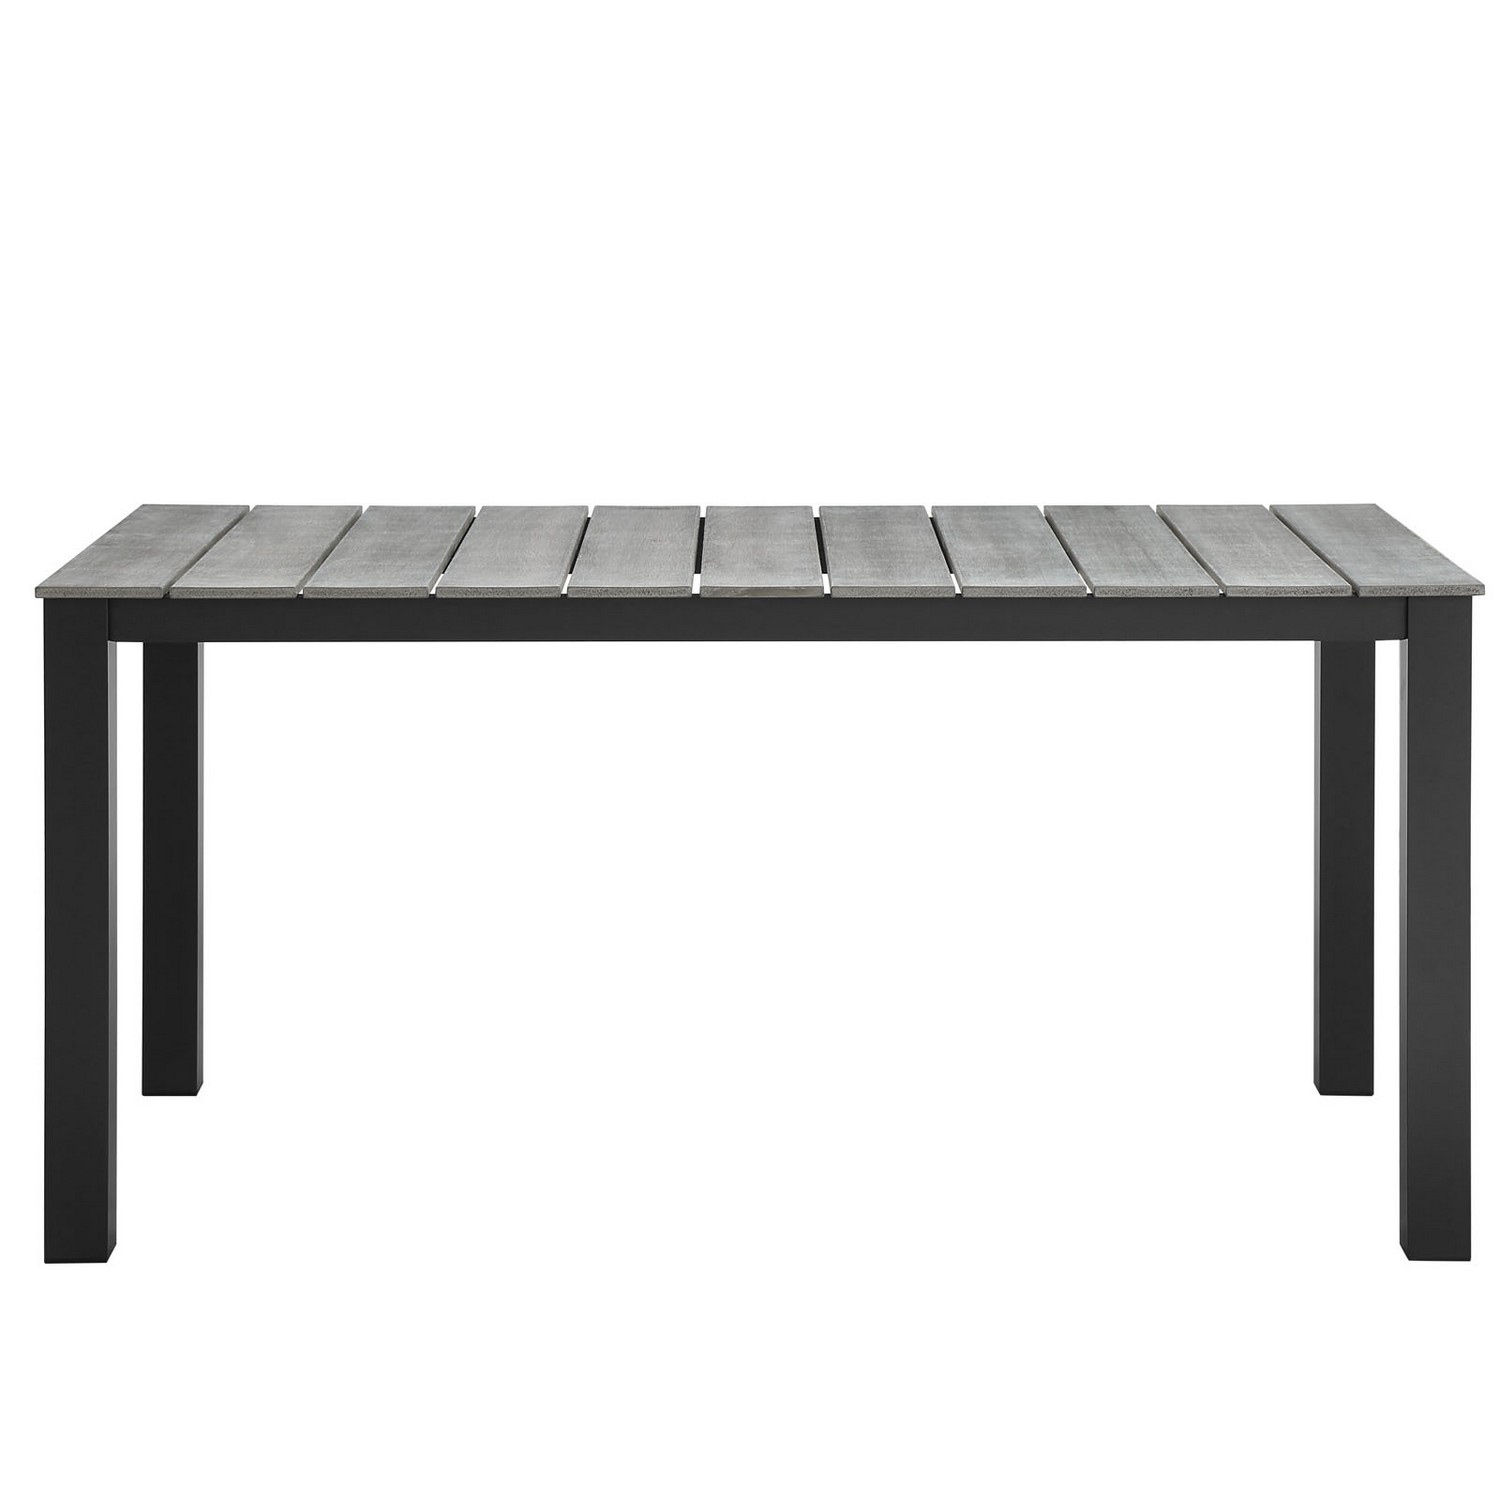 Modway Maine 63 Outdoor Patio Dining Table - Brown/Gray